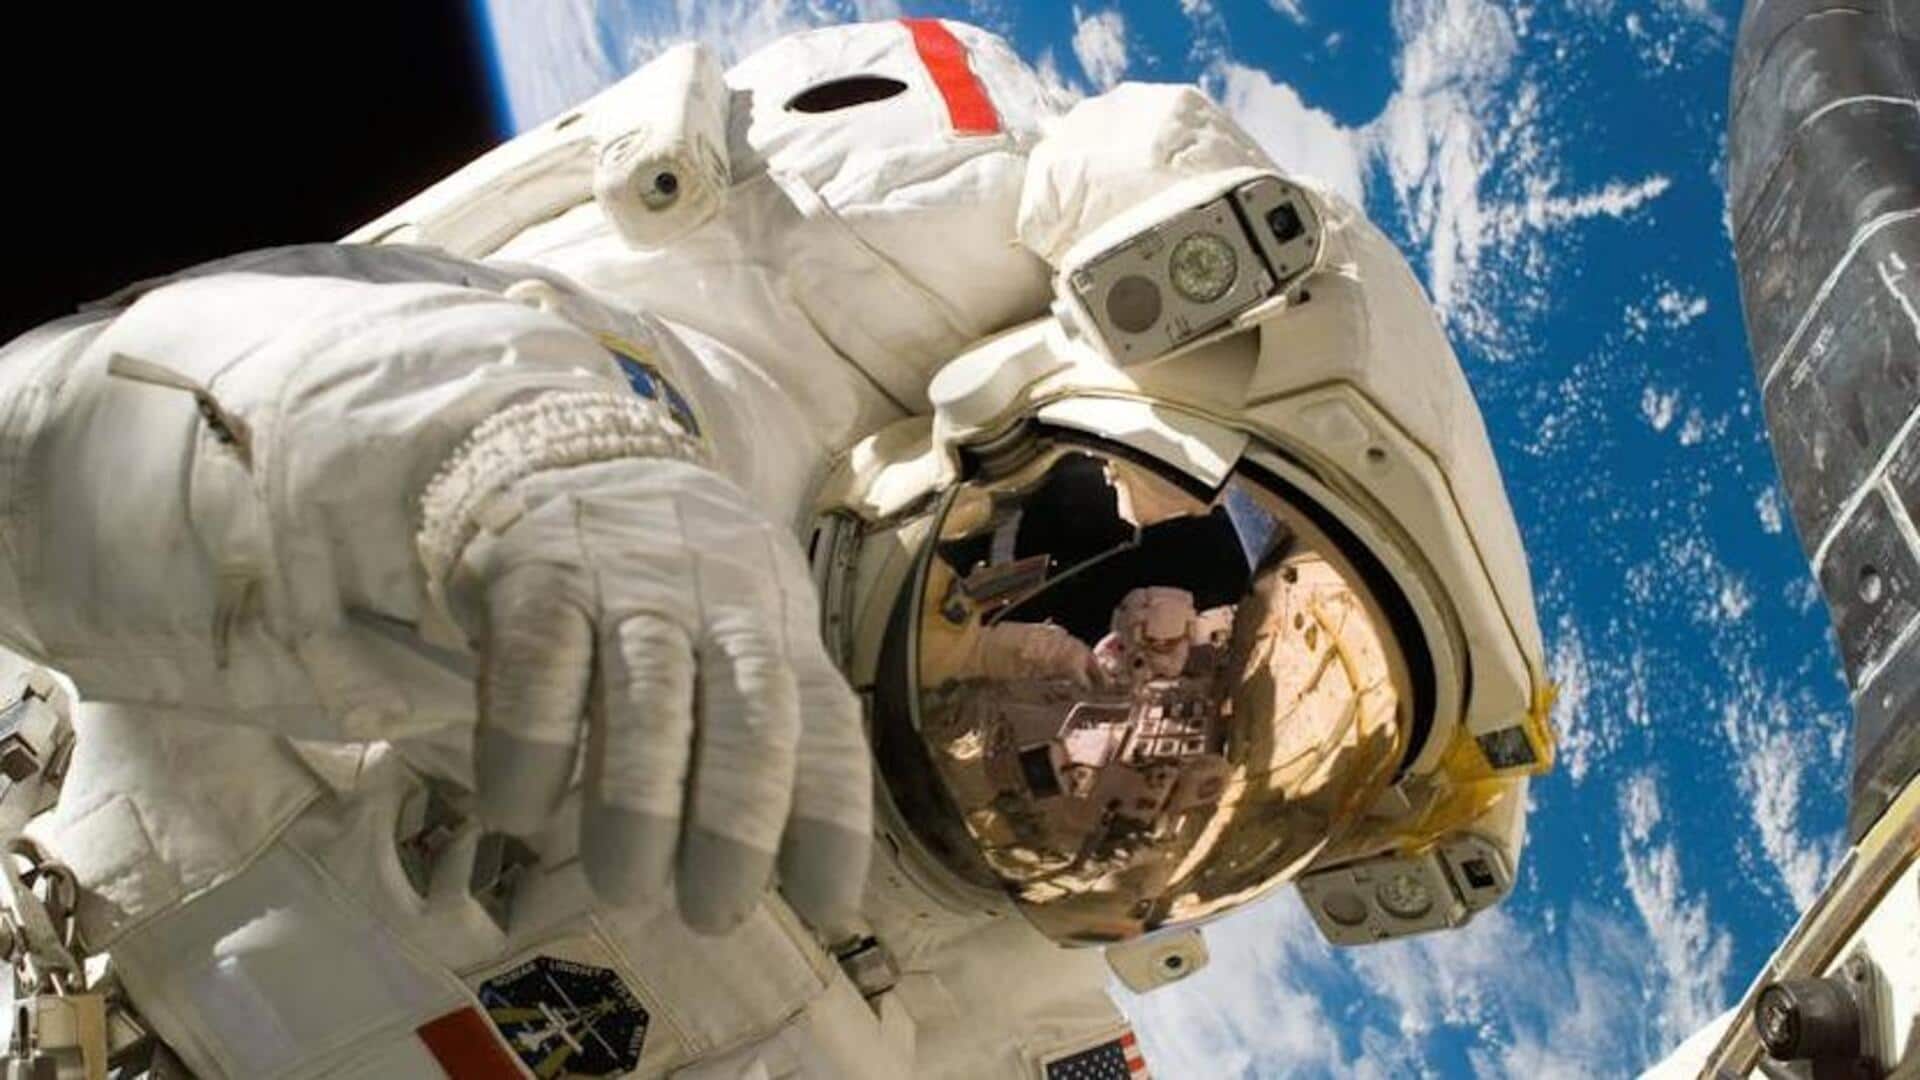 Hollywood's top astronaut-centric films to watch